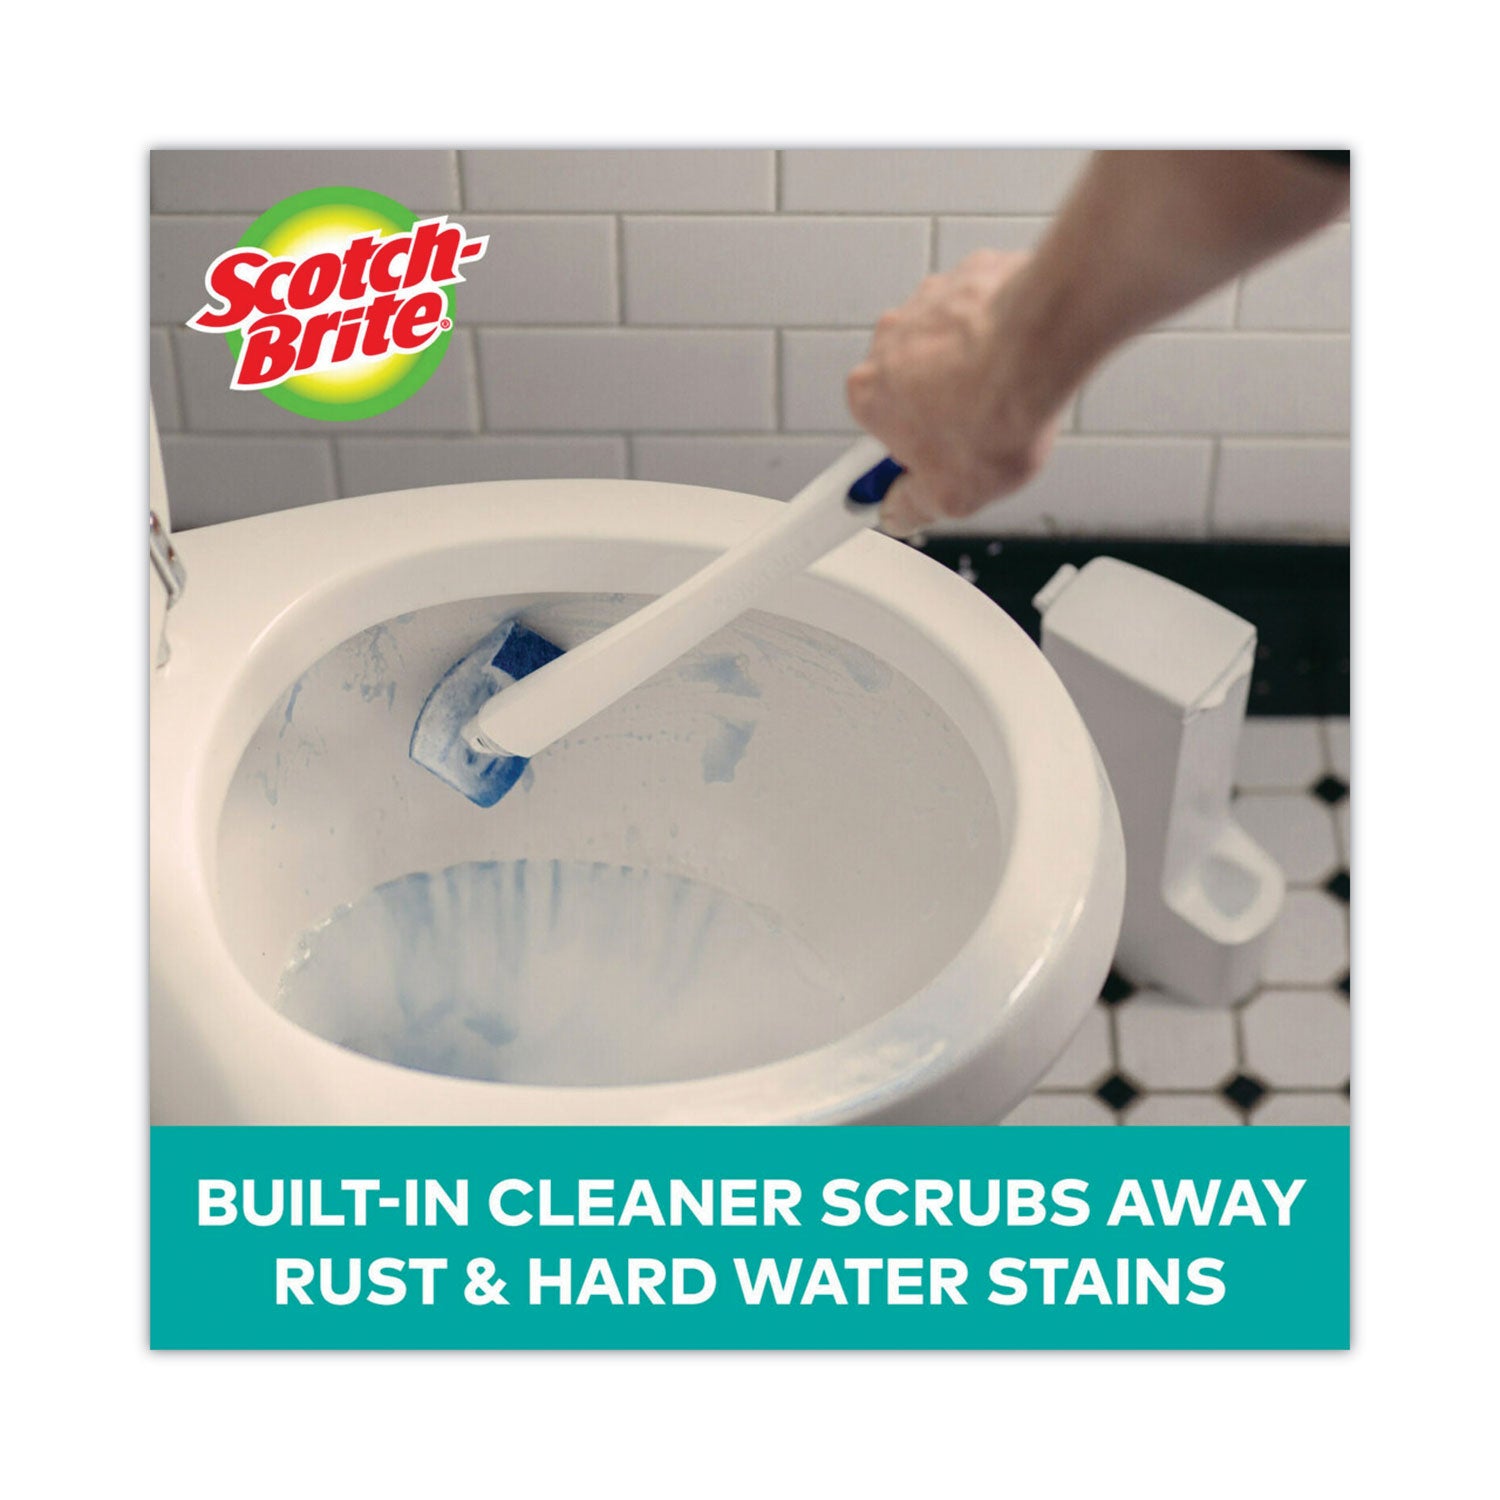 toilet-scrubber-starter-kit-1-handle-and-5-scrubbers-white-blue_mmm558sk4np - 5